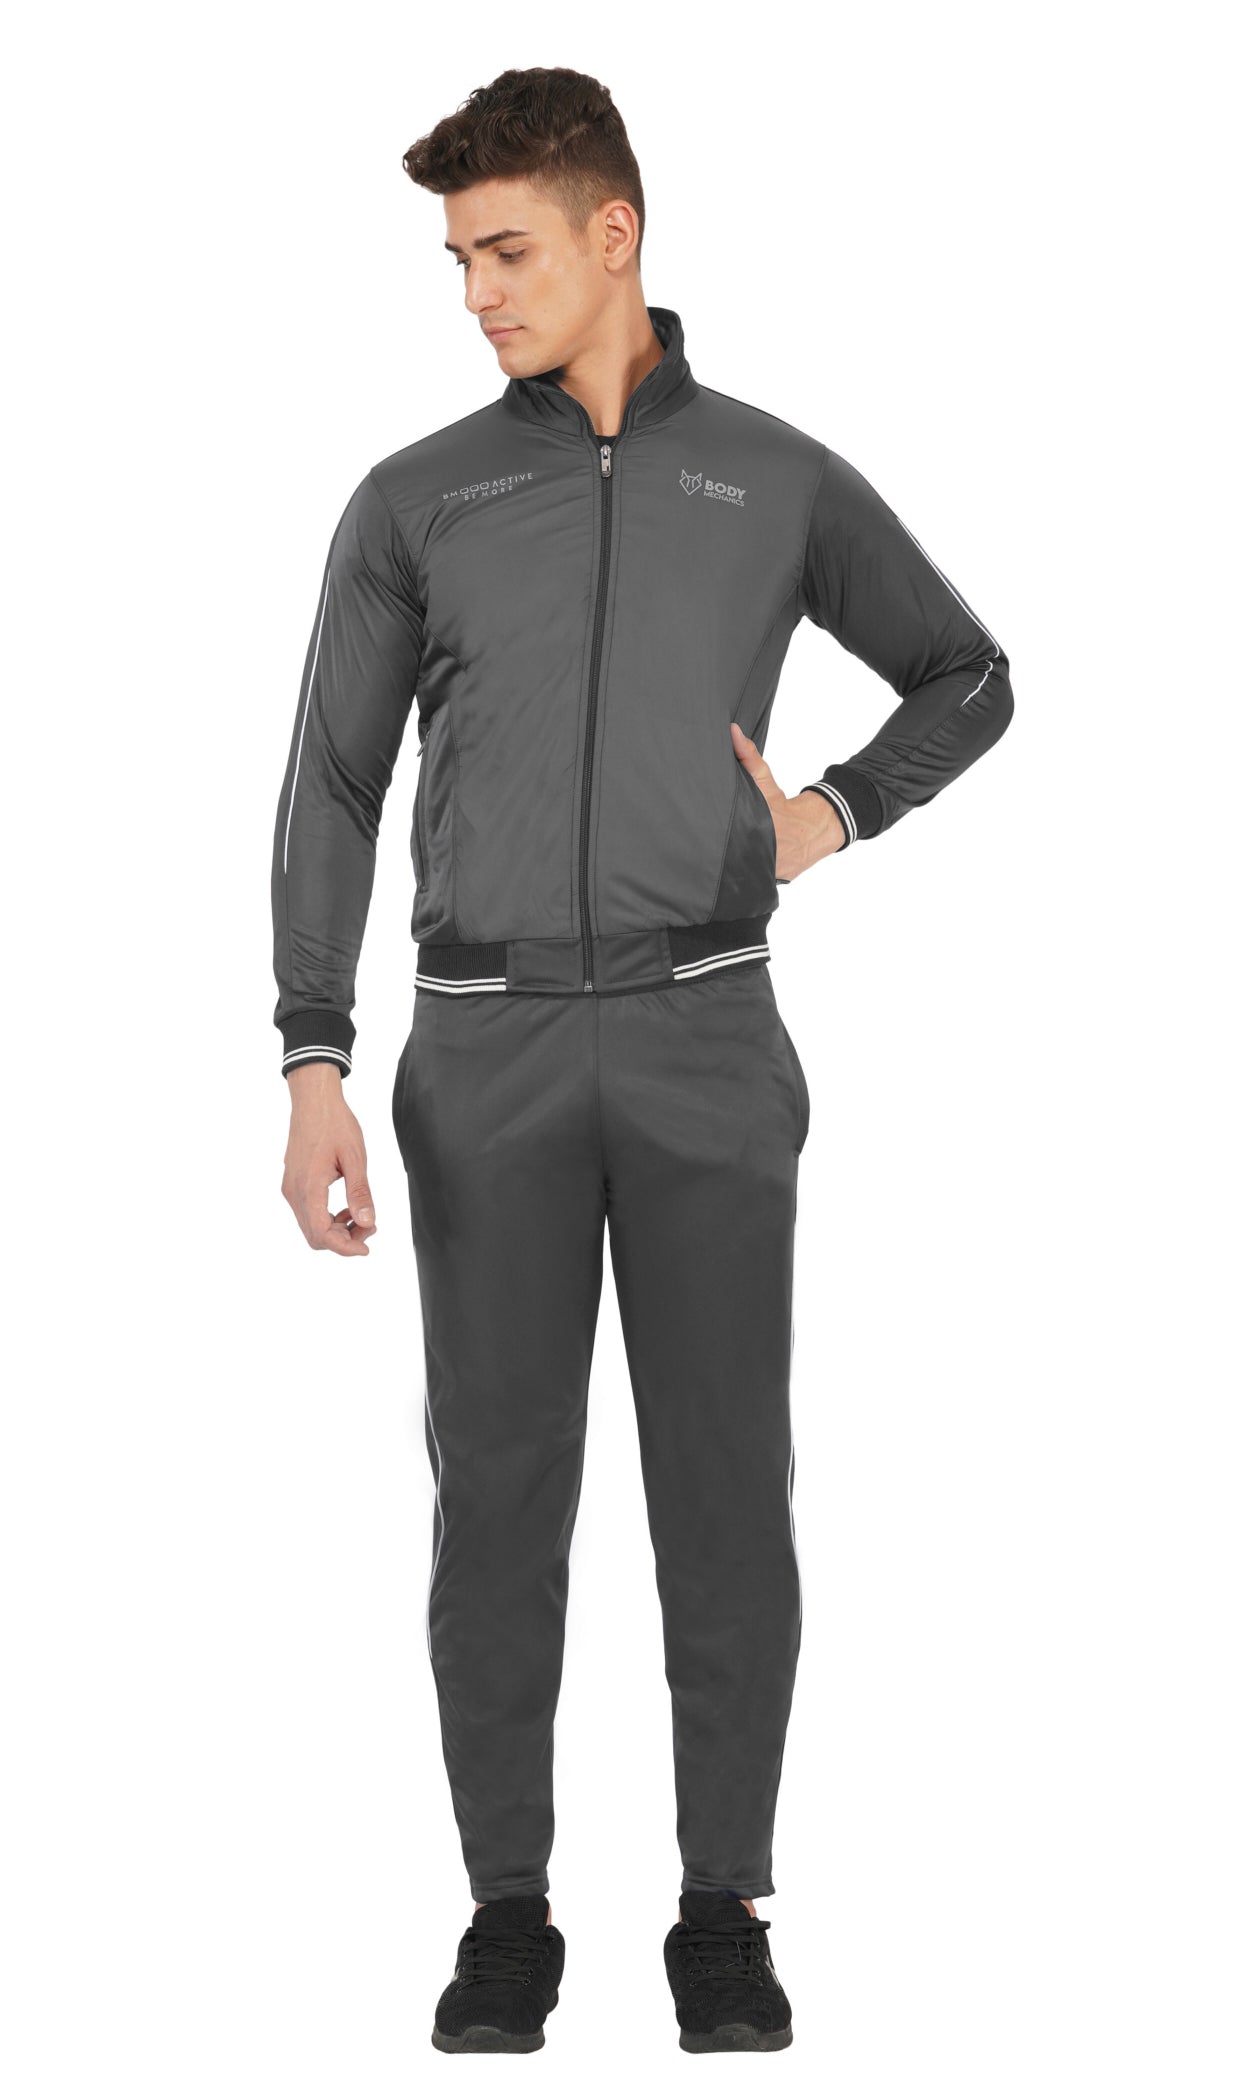 Premium Tracksuit for Boys | Stretchable Wool | Cozy and Dynamic Men's Tracksuit